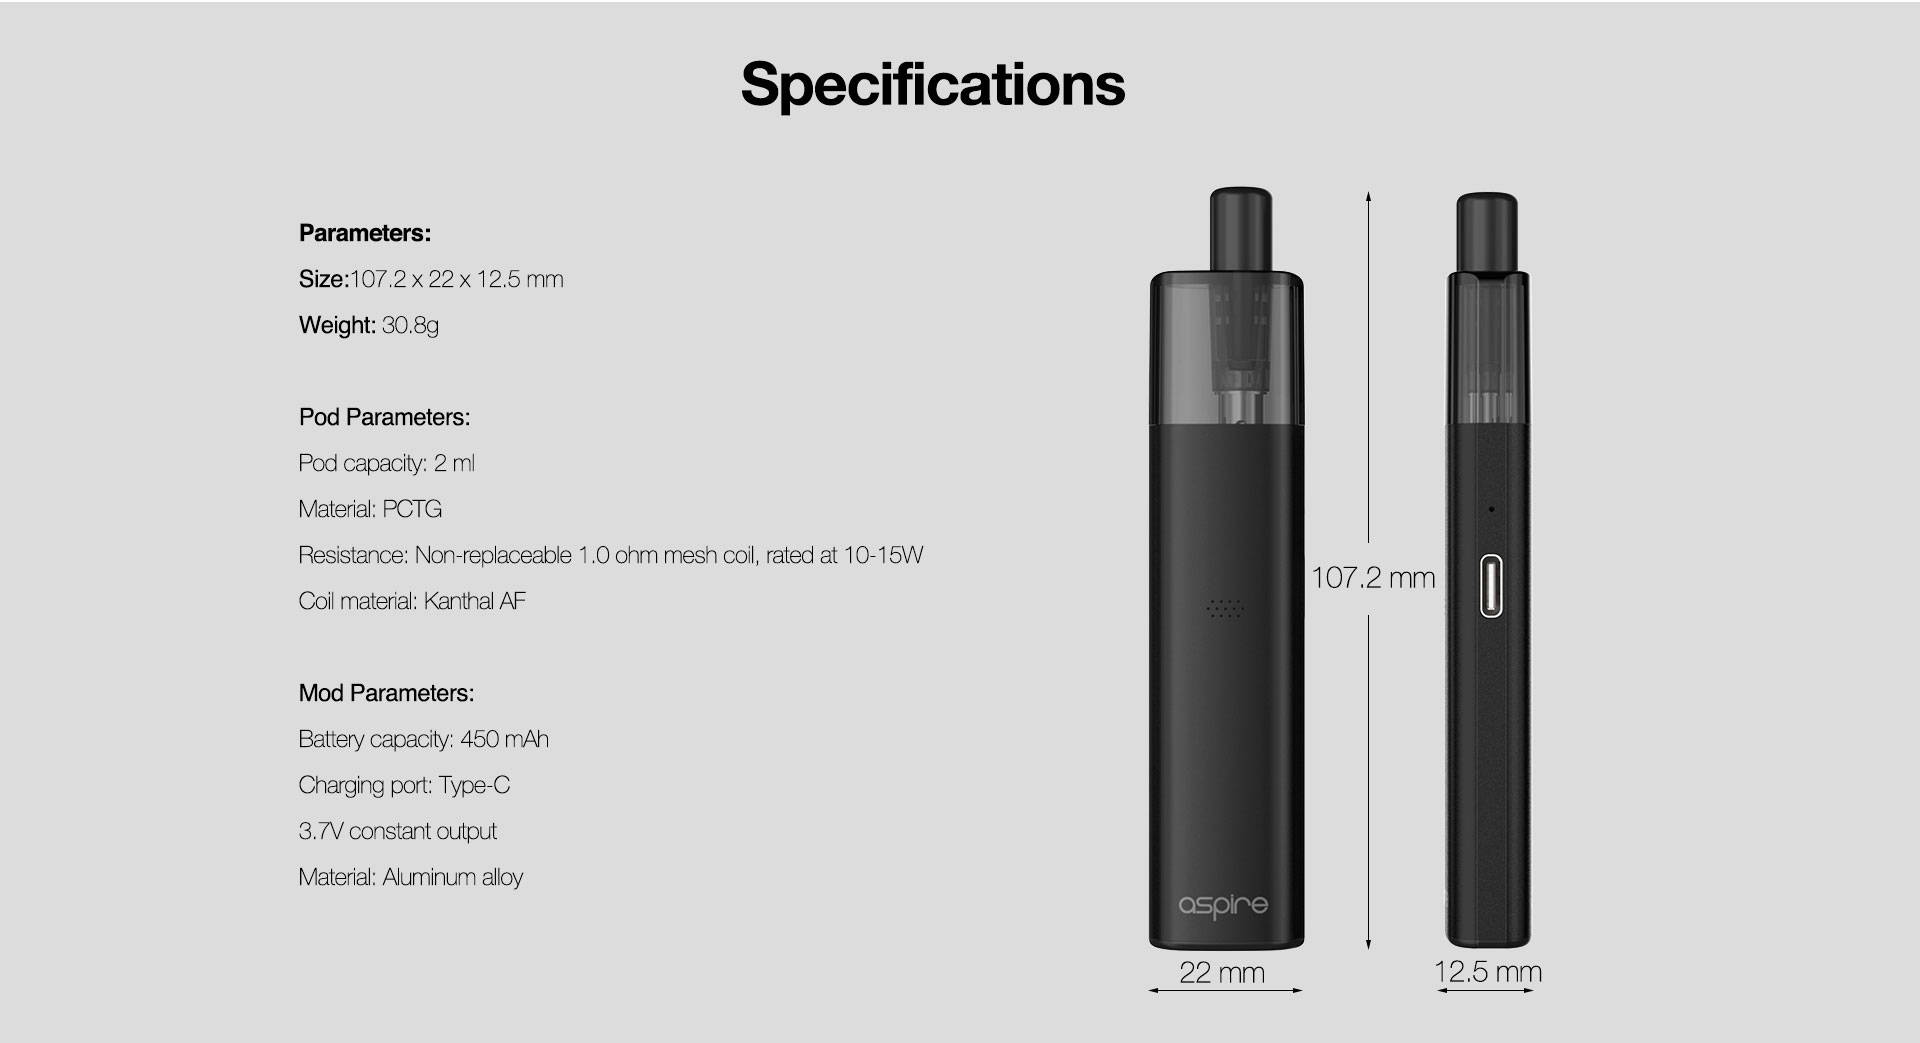 Parameters:  Size:107.2 x 22 x 12.5 mm  Weight: 30.8g  Pod Parameters: Pod capacity: 2 ml Material: PCTG Resistance: Non-replaceable 1.0 ohm mesh coil, rated at 10-15W Coil material: Kanthal AF  Mod Parameters: Battery capacity: 450 mAh Charging port: Type-C 3.7V constant output Material: Aluminum alloy